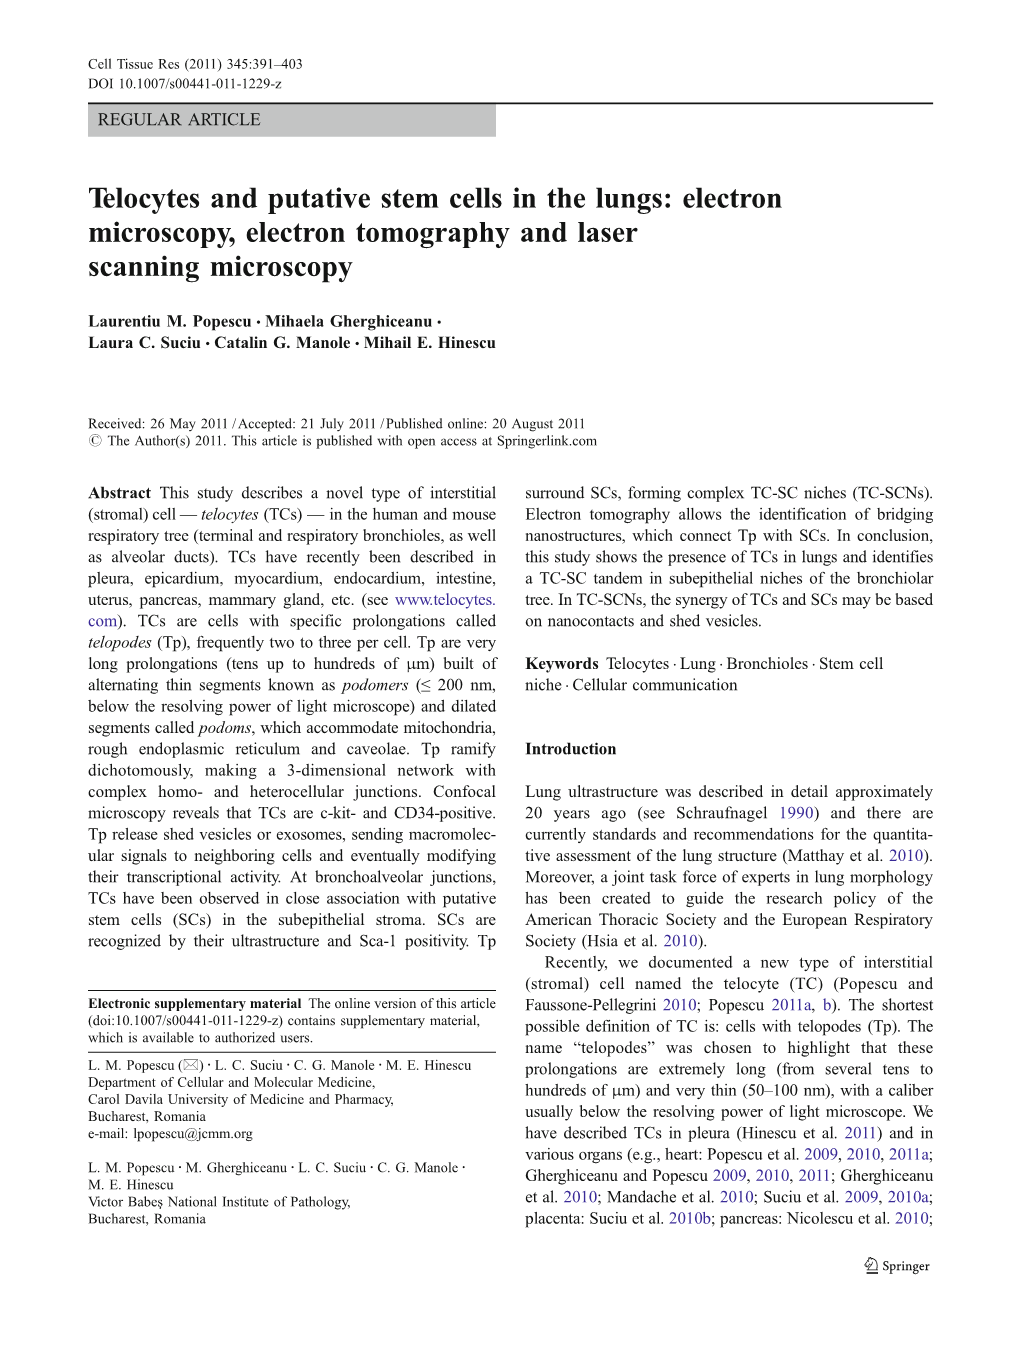 Telocytes and Putative Stem Cells in the Lungs: Electron Microscopy, Electron Tomography and Laser Scanning Microscopy